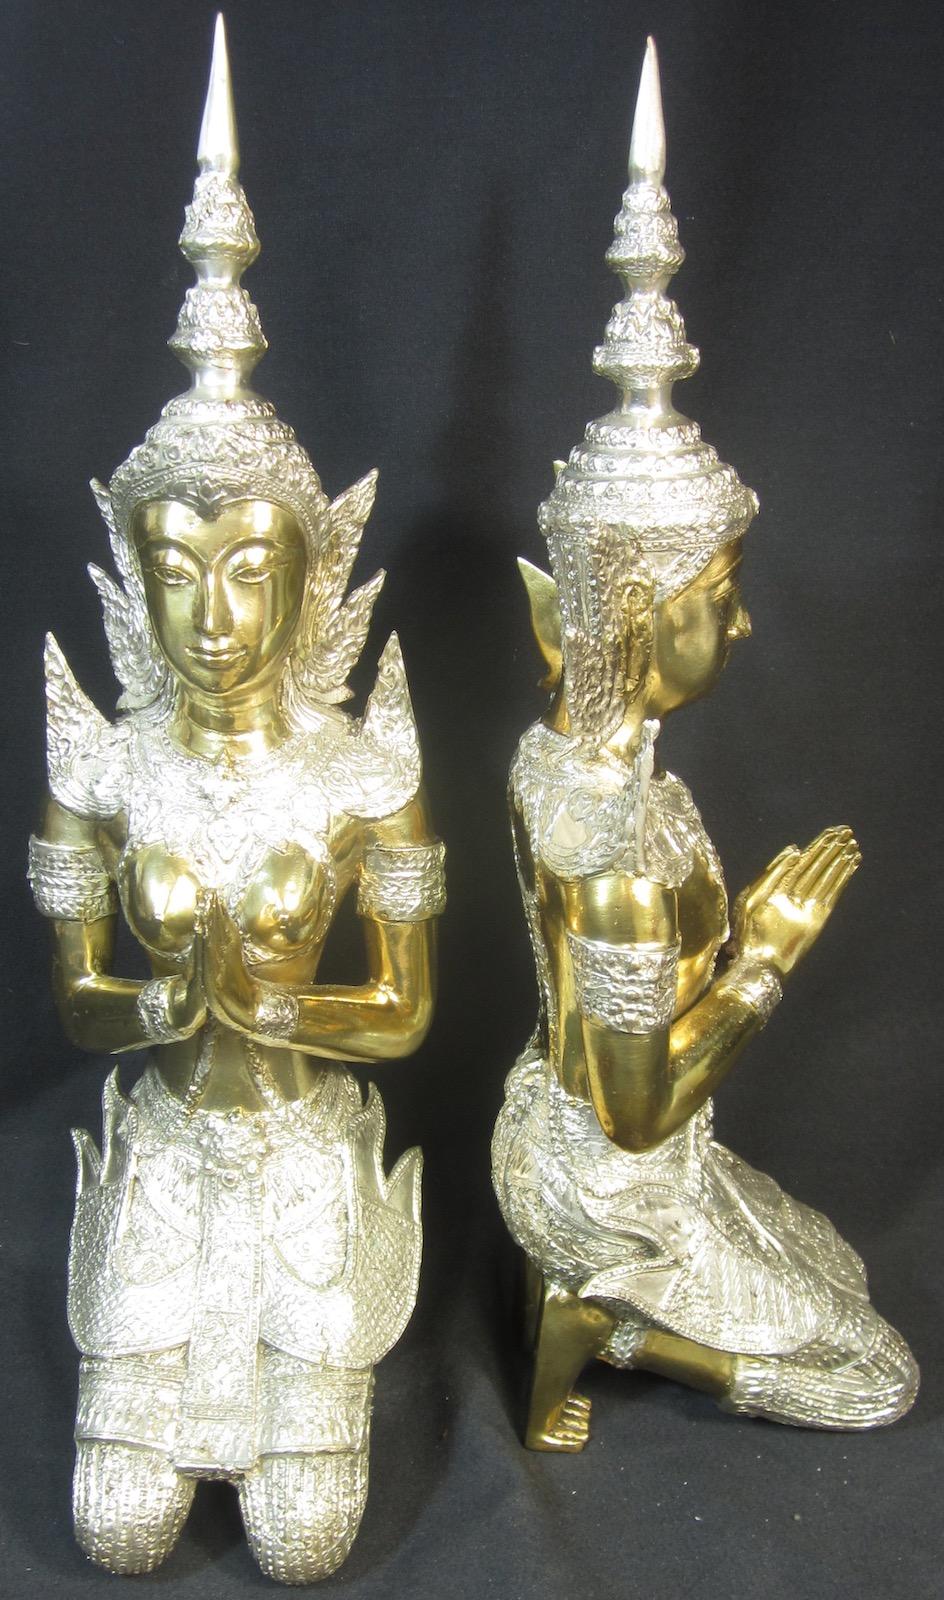 Pair Thai gilt brass figures, 
total weight 5.3kg.
Our eclectic stock crosses cultures, continents, styles and famous names.